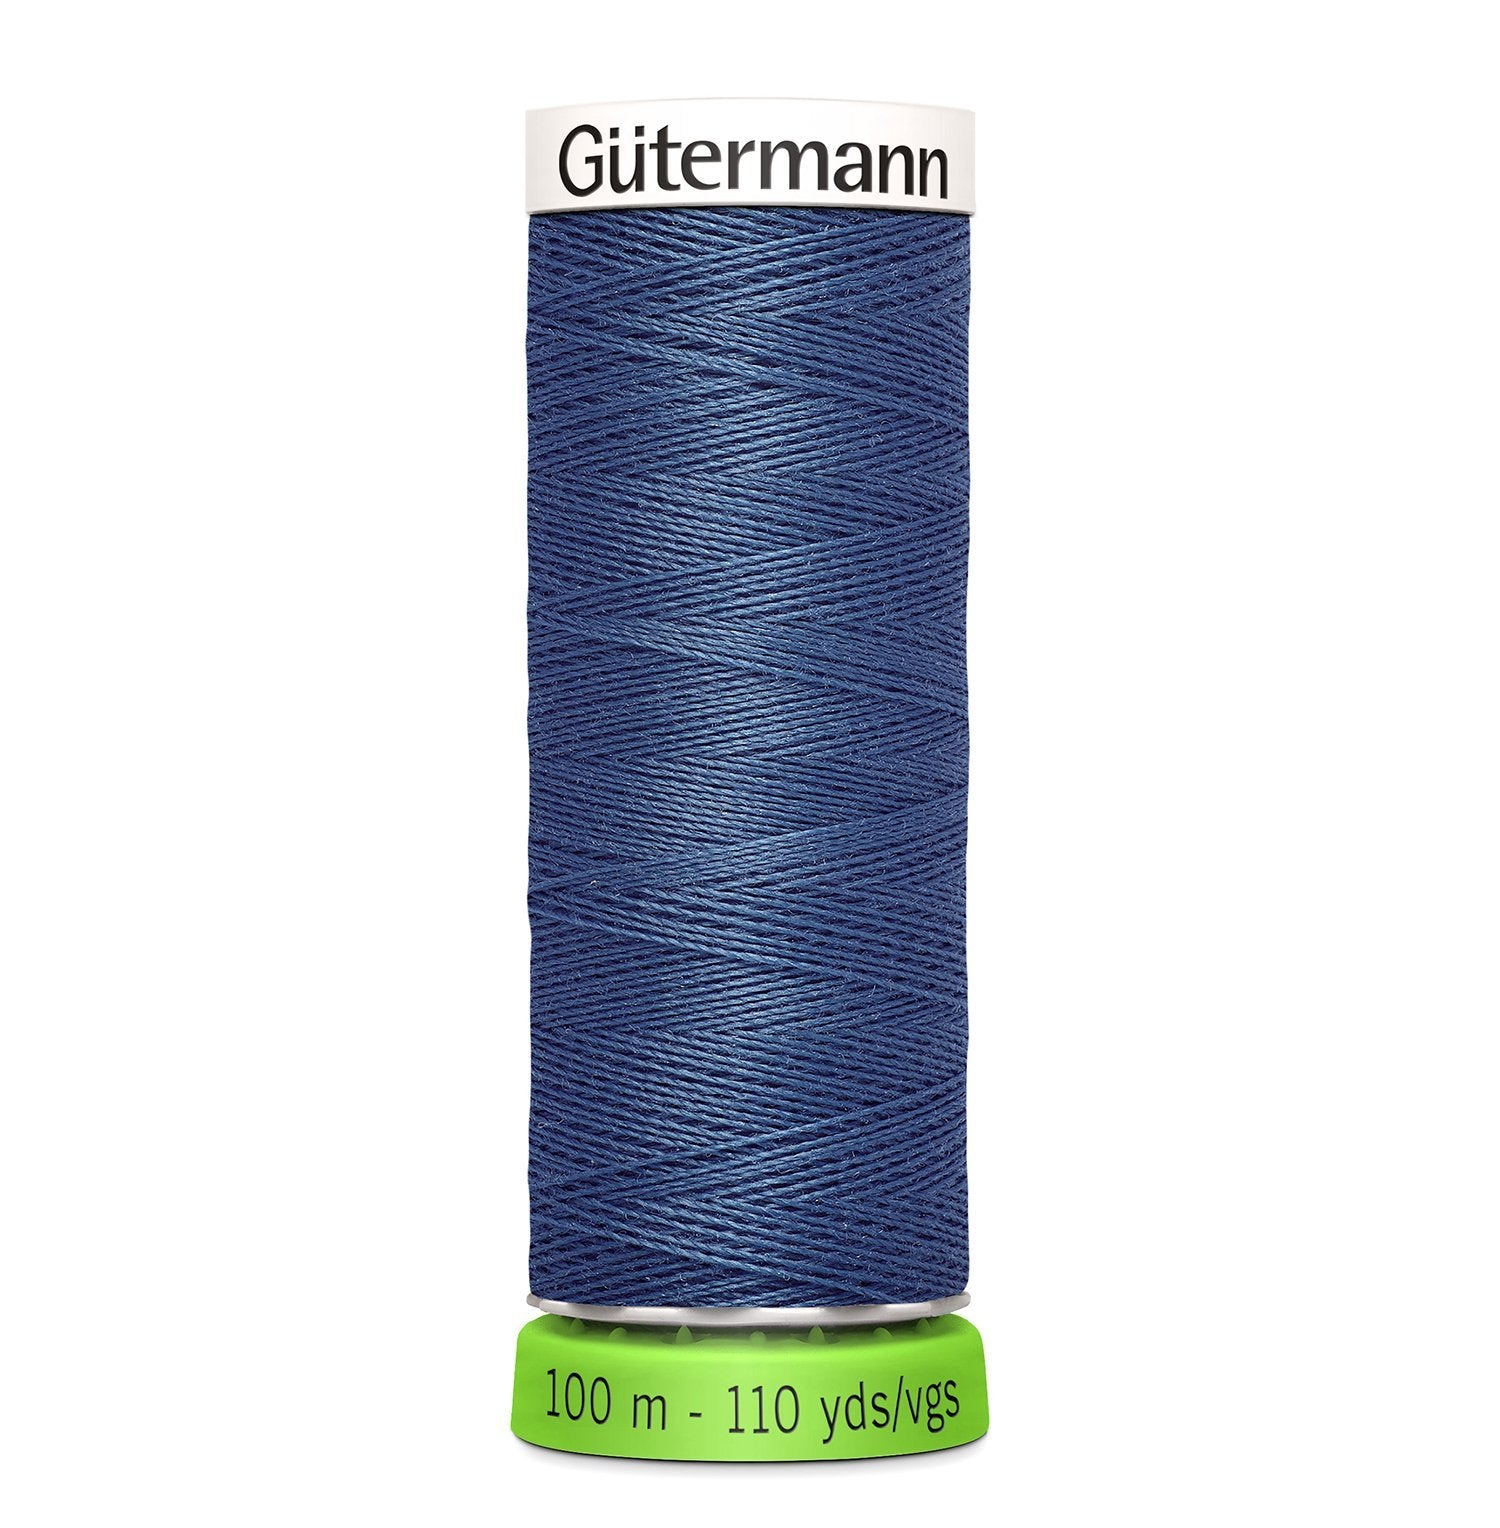 Gutermann Recycled Thread 100m, Colour 68 from Jaycotts Sewing Supplies